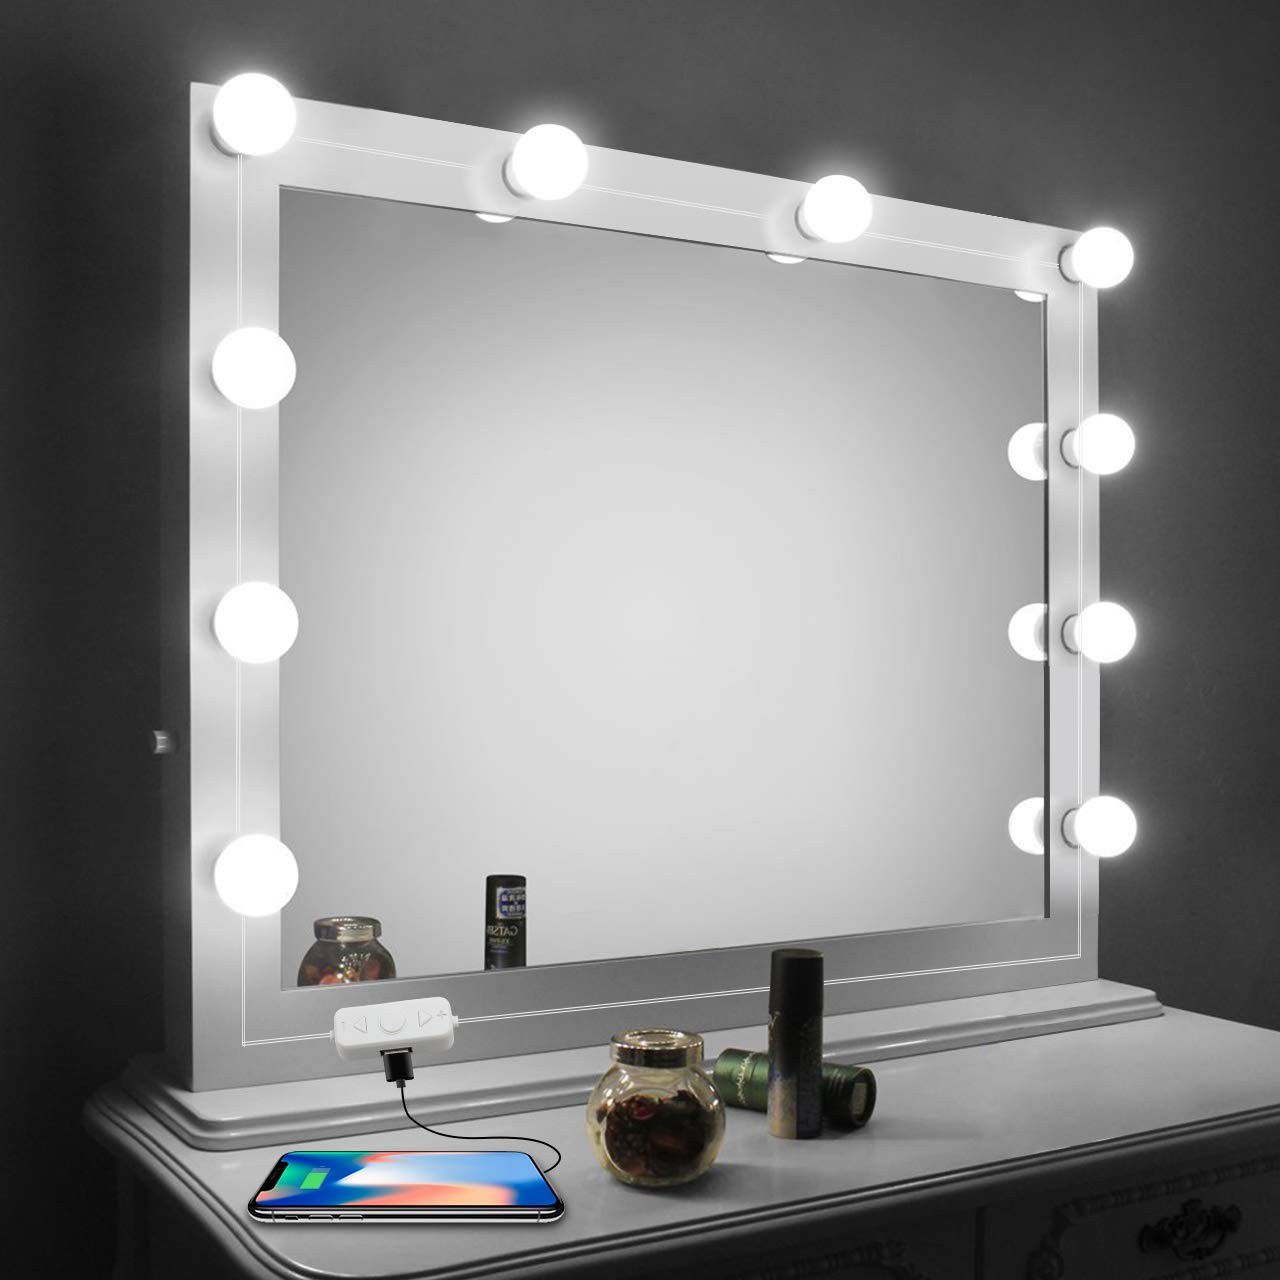 Vanity Mirror Lights Kit,LED Lights for Mirror with Dimmer and USB Phone Charger,LED Makeup Mirror Lights Kit